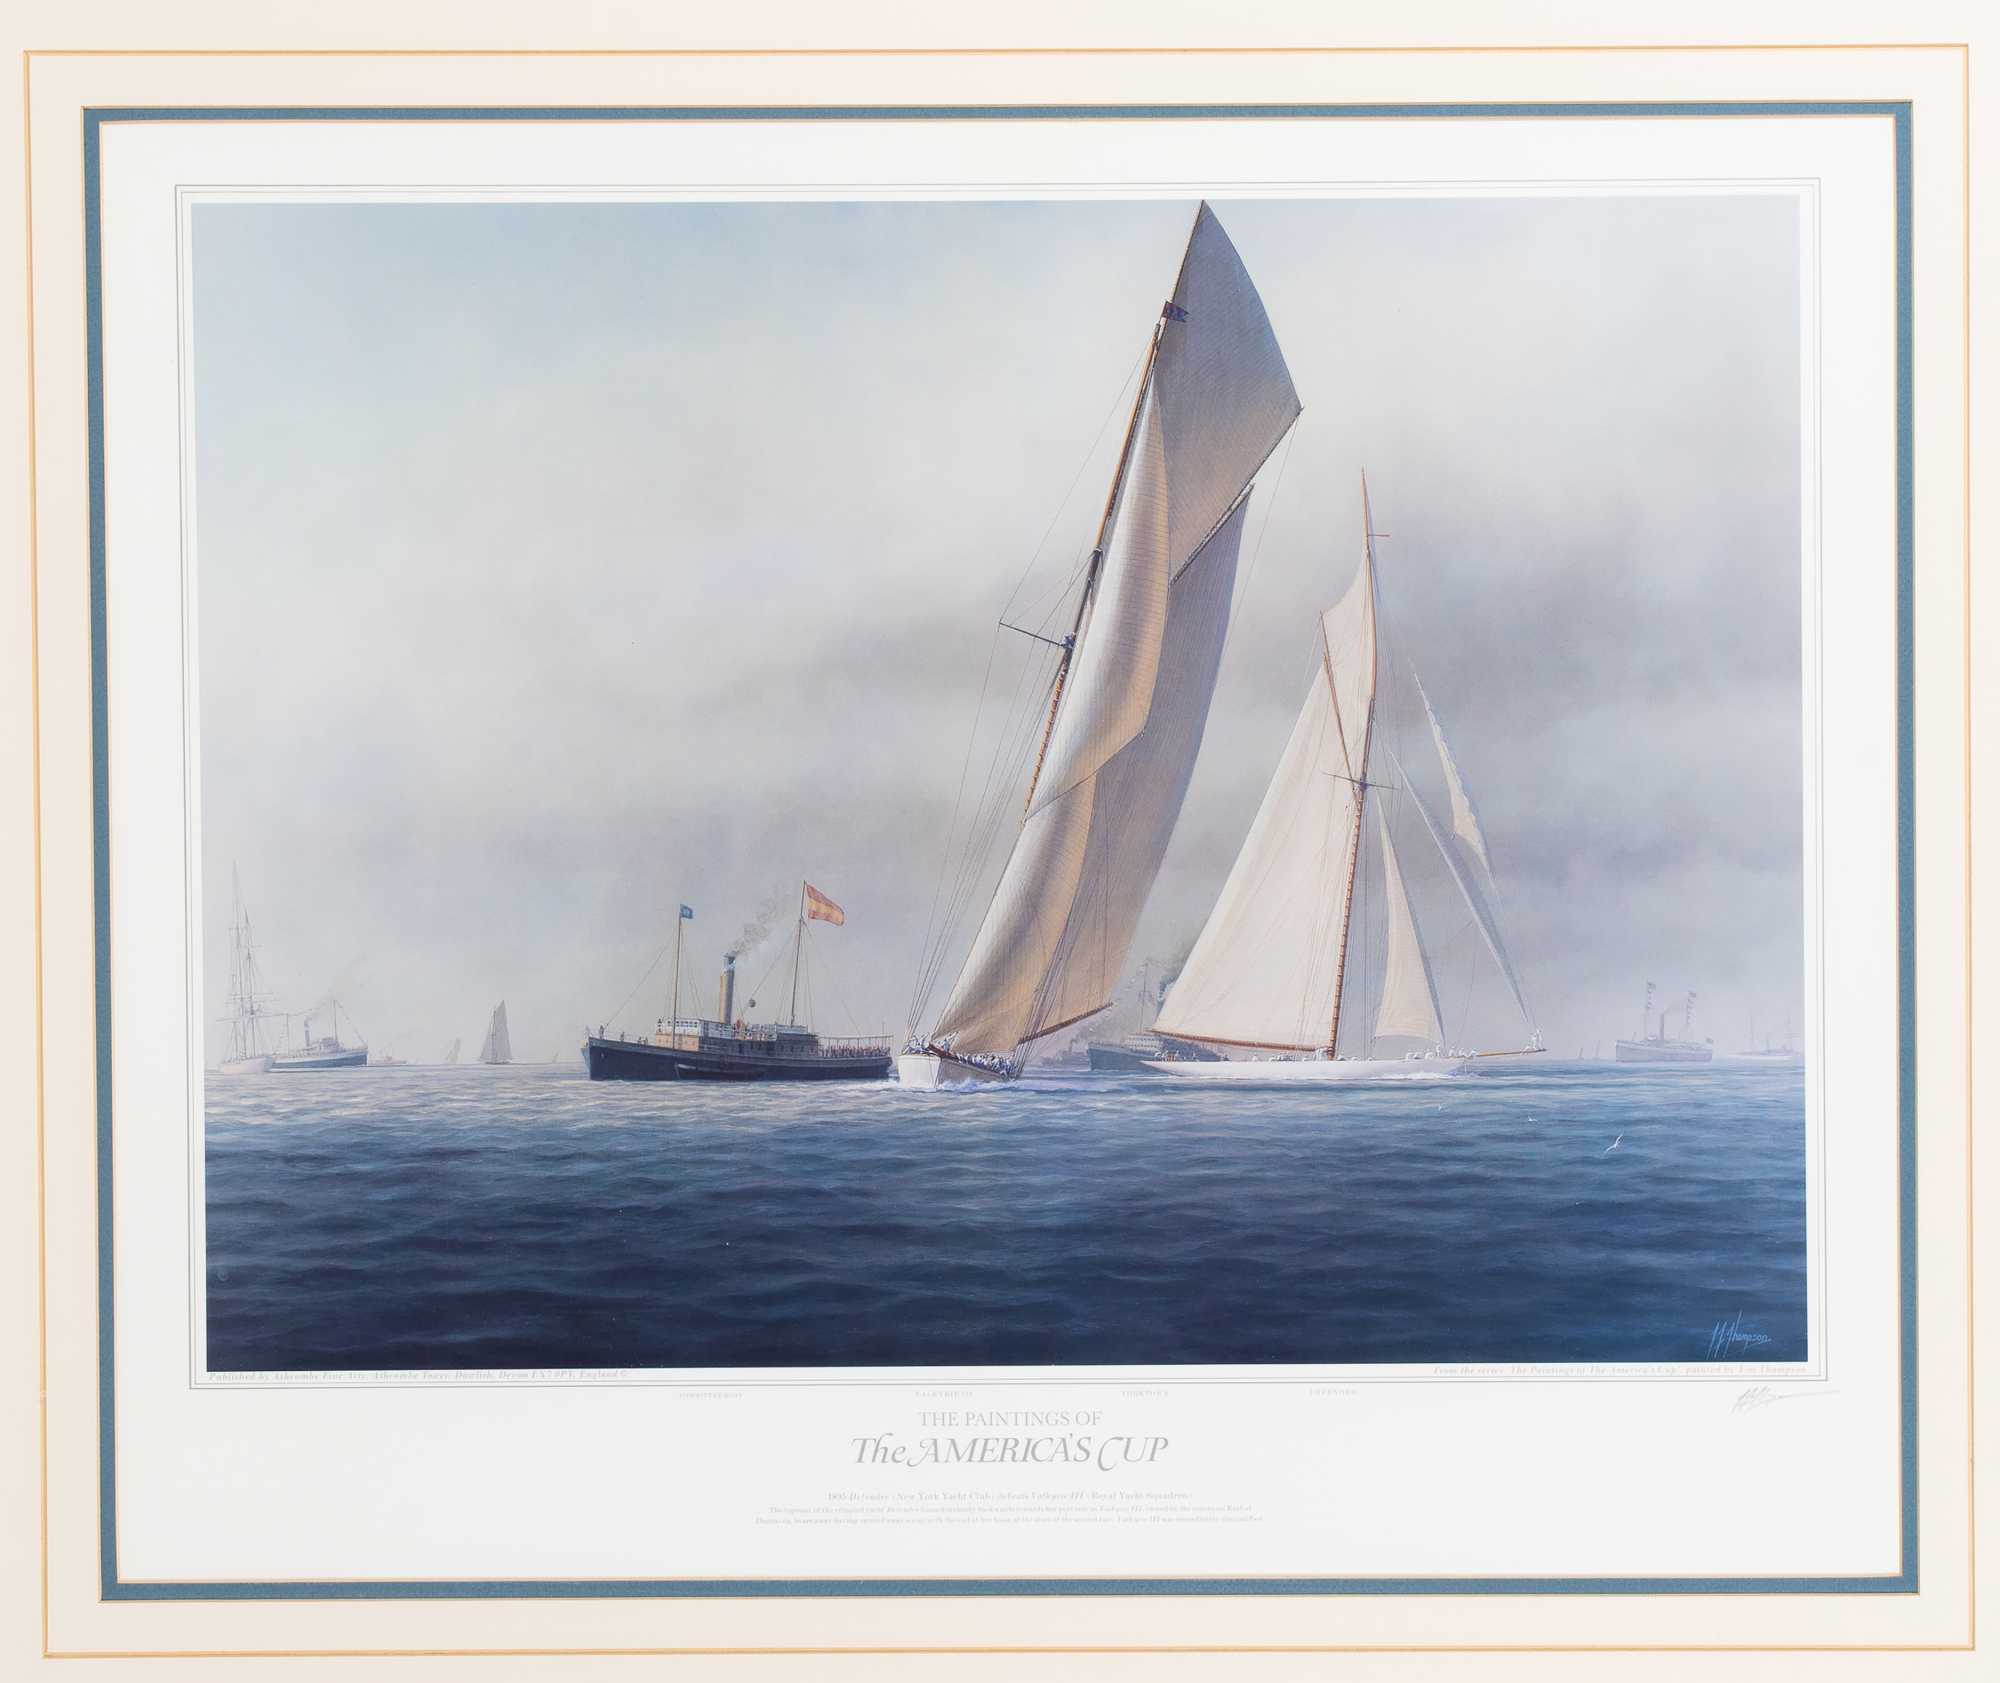 Lot - FRAMED AMERICA'S CUP PRINT: America's Cup Challenge 1983